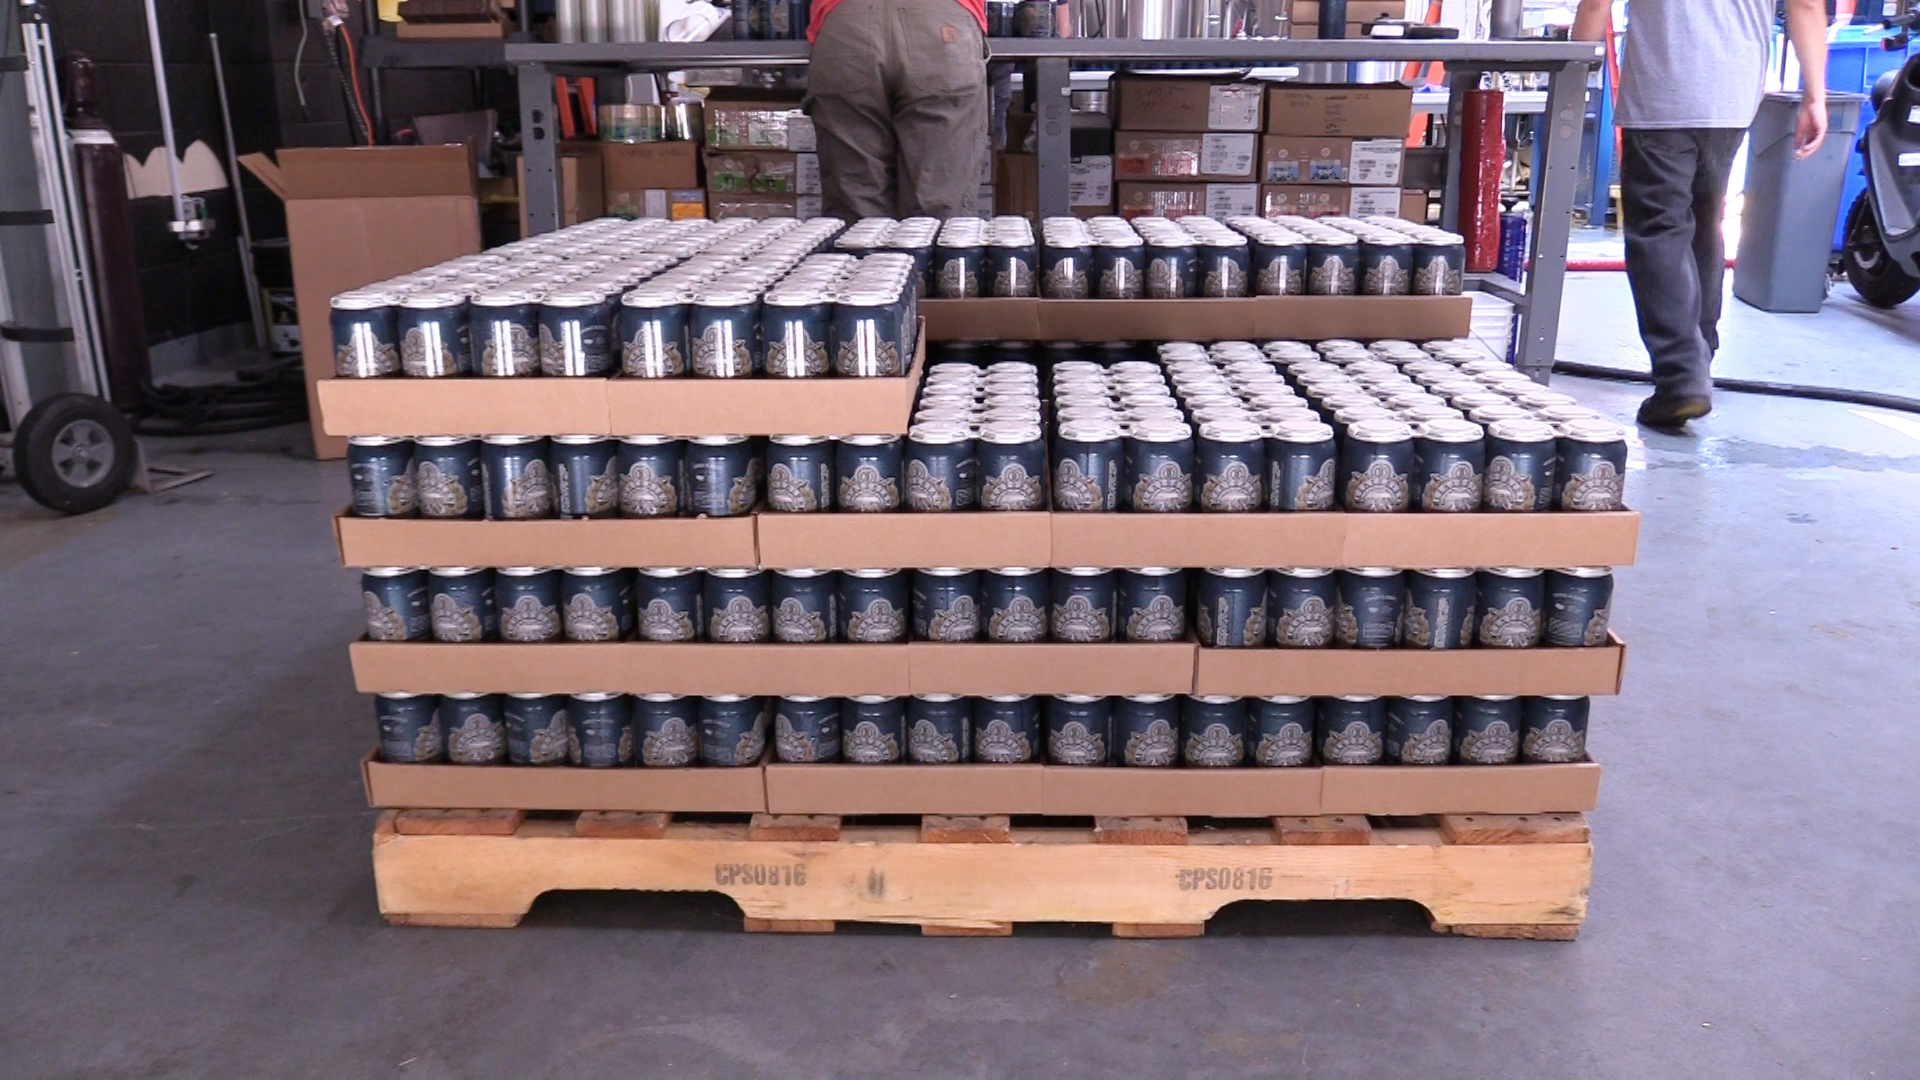 Cans of Centurion Fine Pilsner ready for delivery.